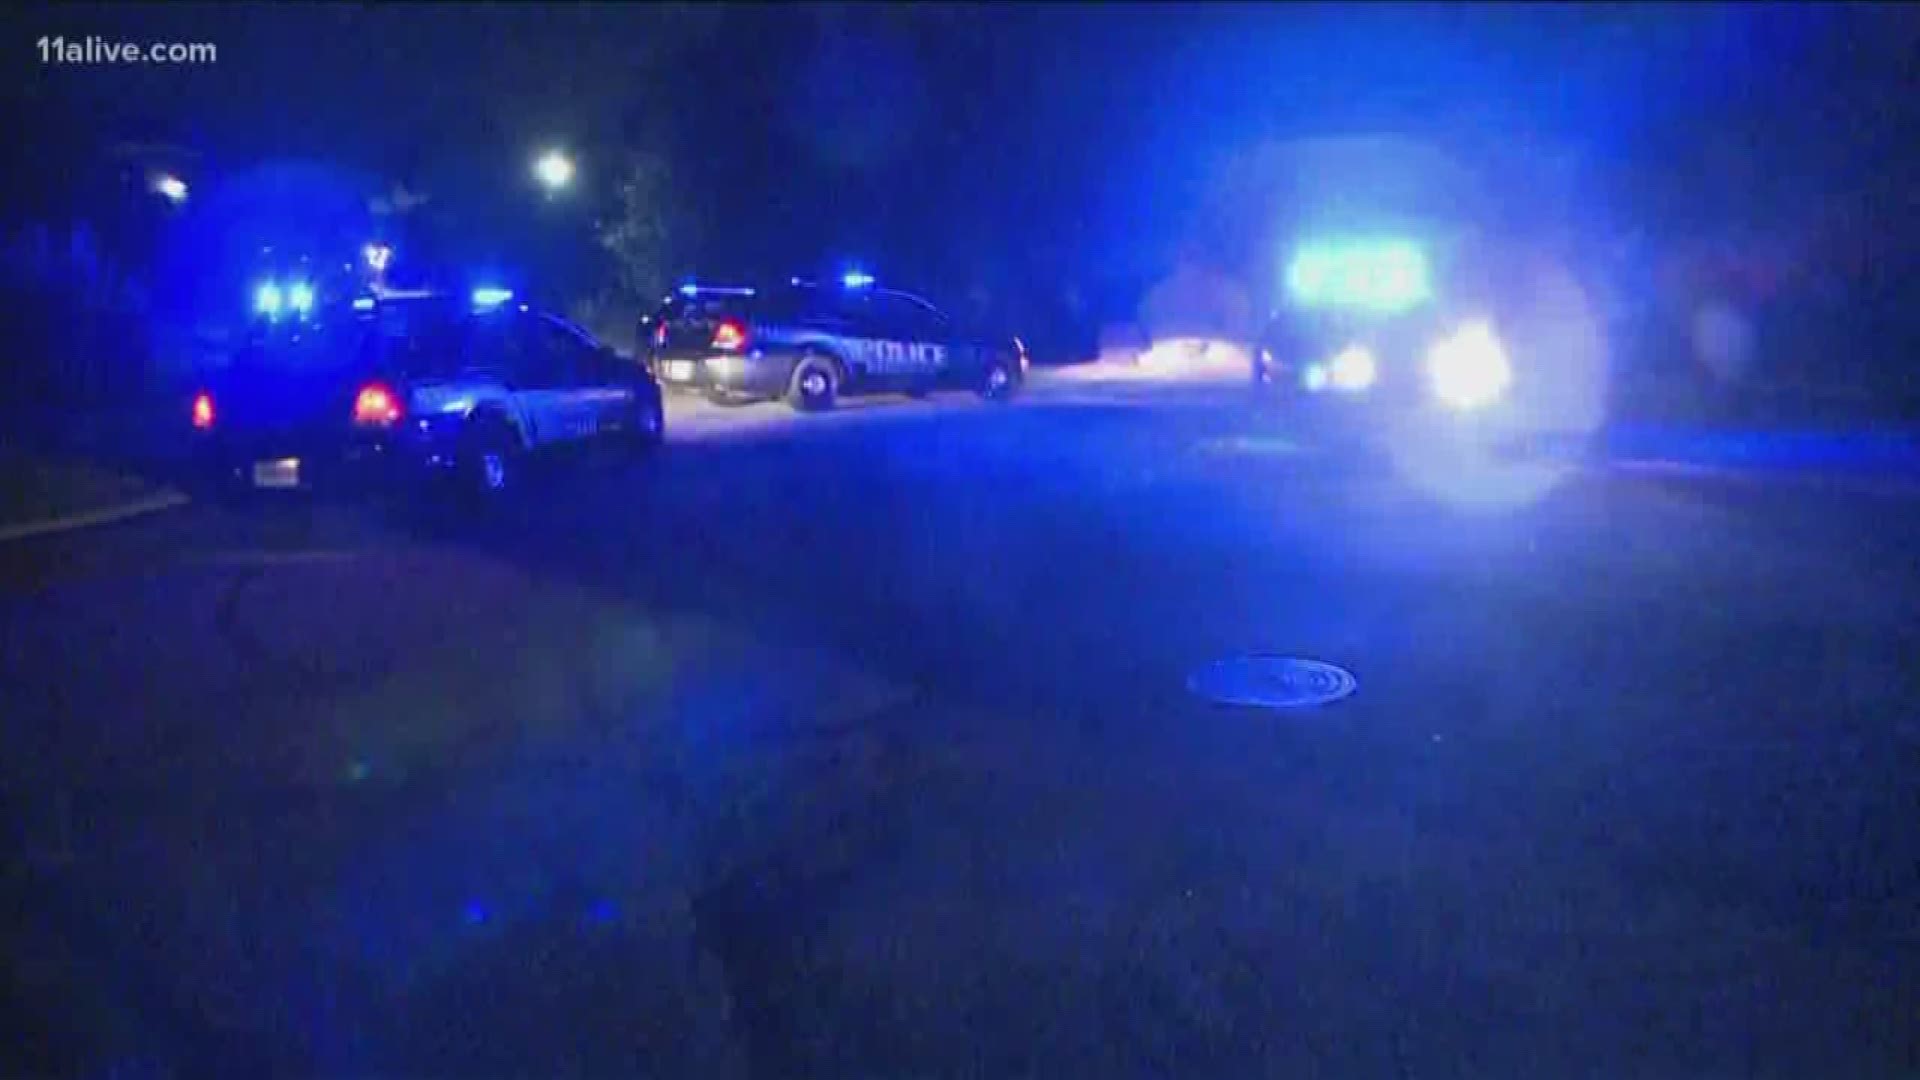 A SWAT standoff, triggered after reports of a possible home invasion, resulted in the discovery of a man found dead inside a DeKalb County apartment complex.